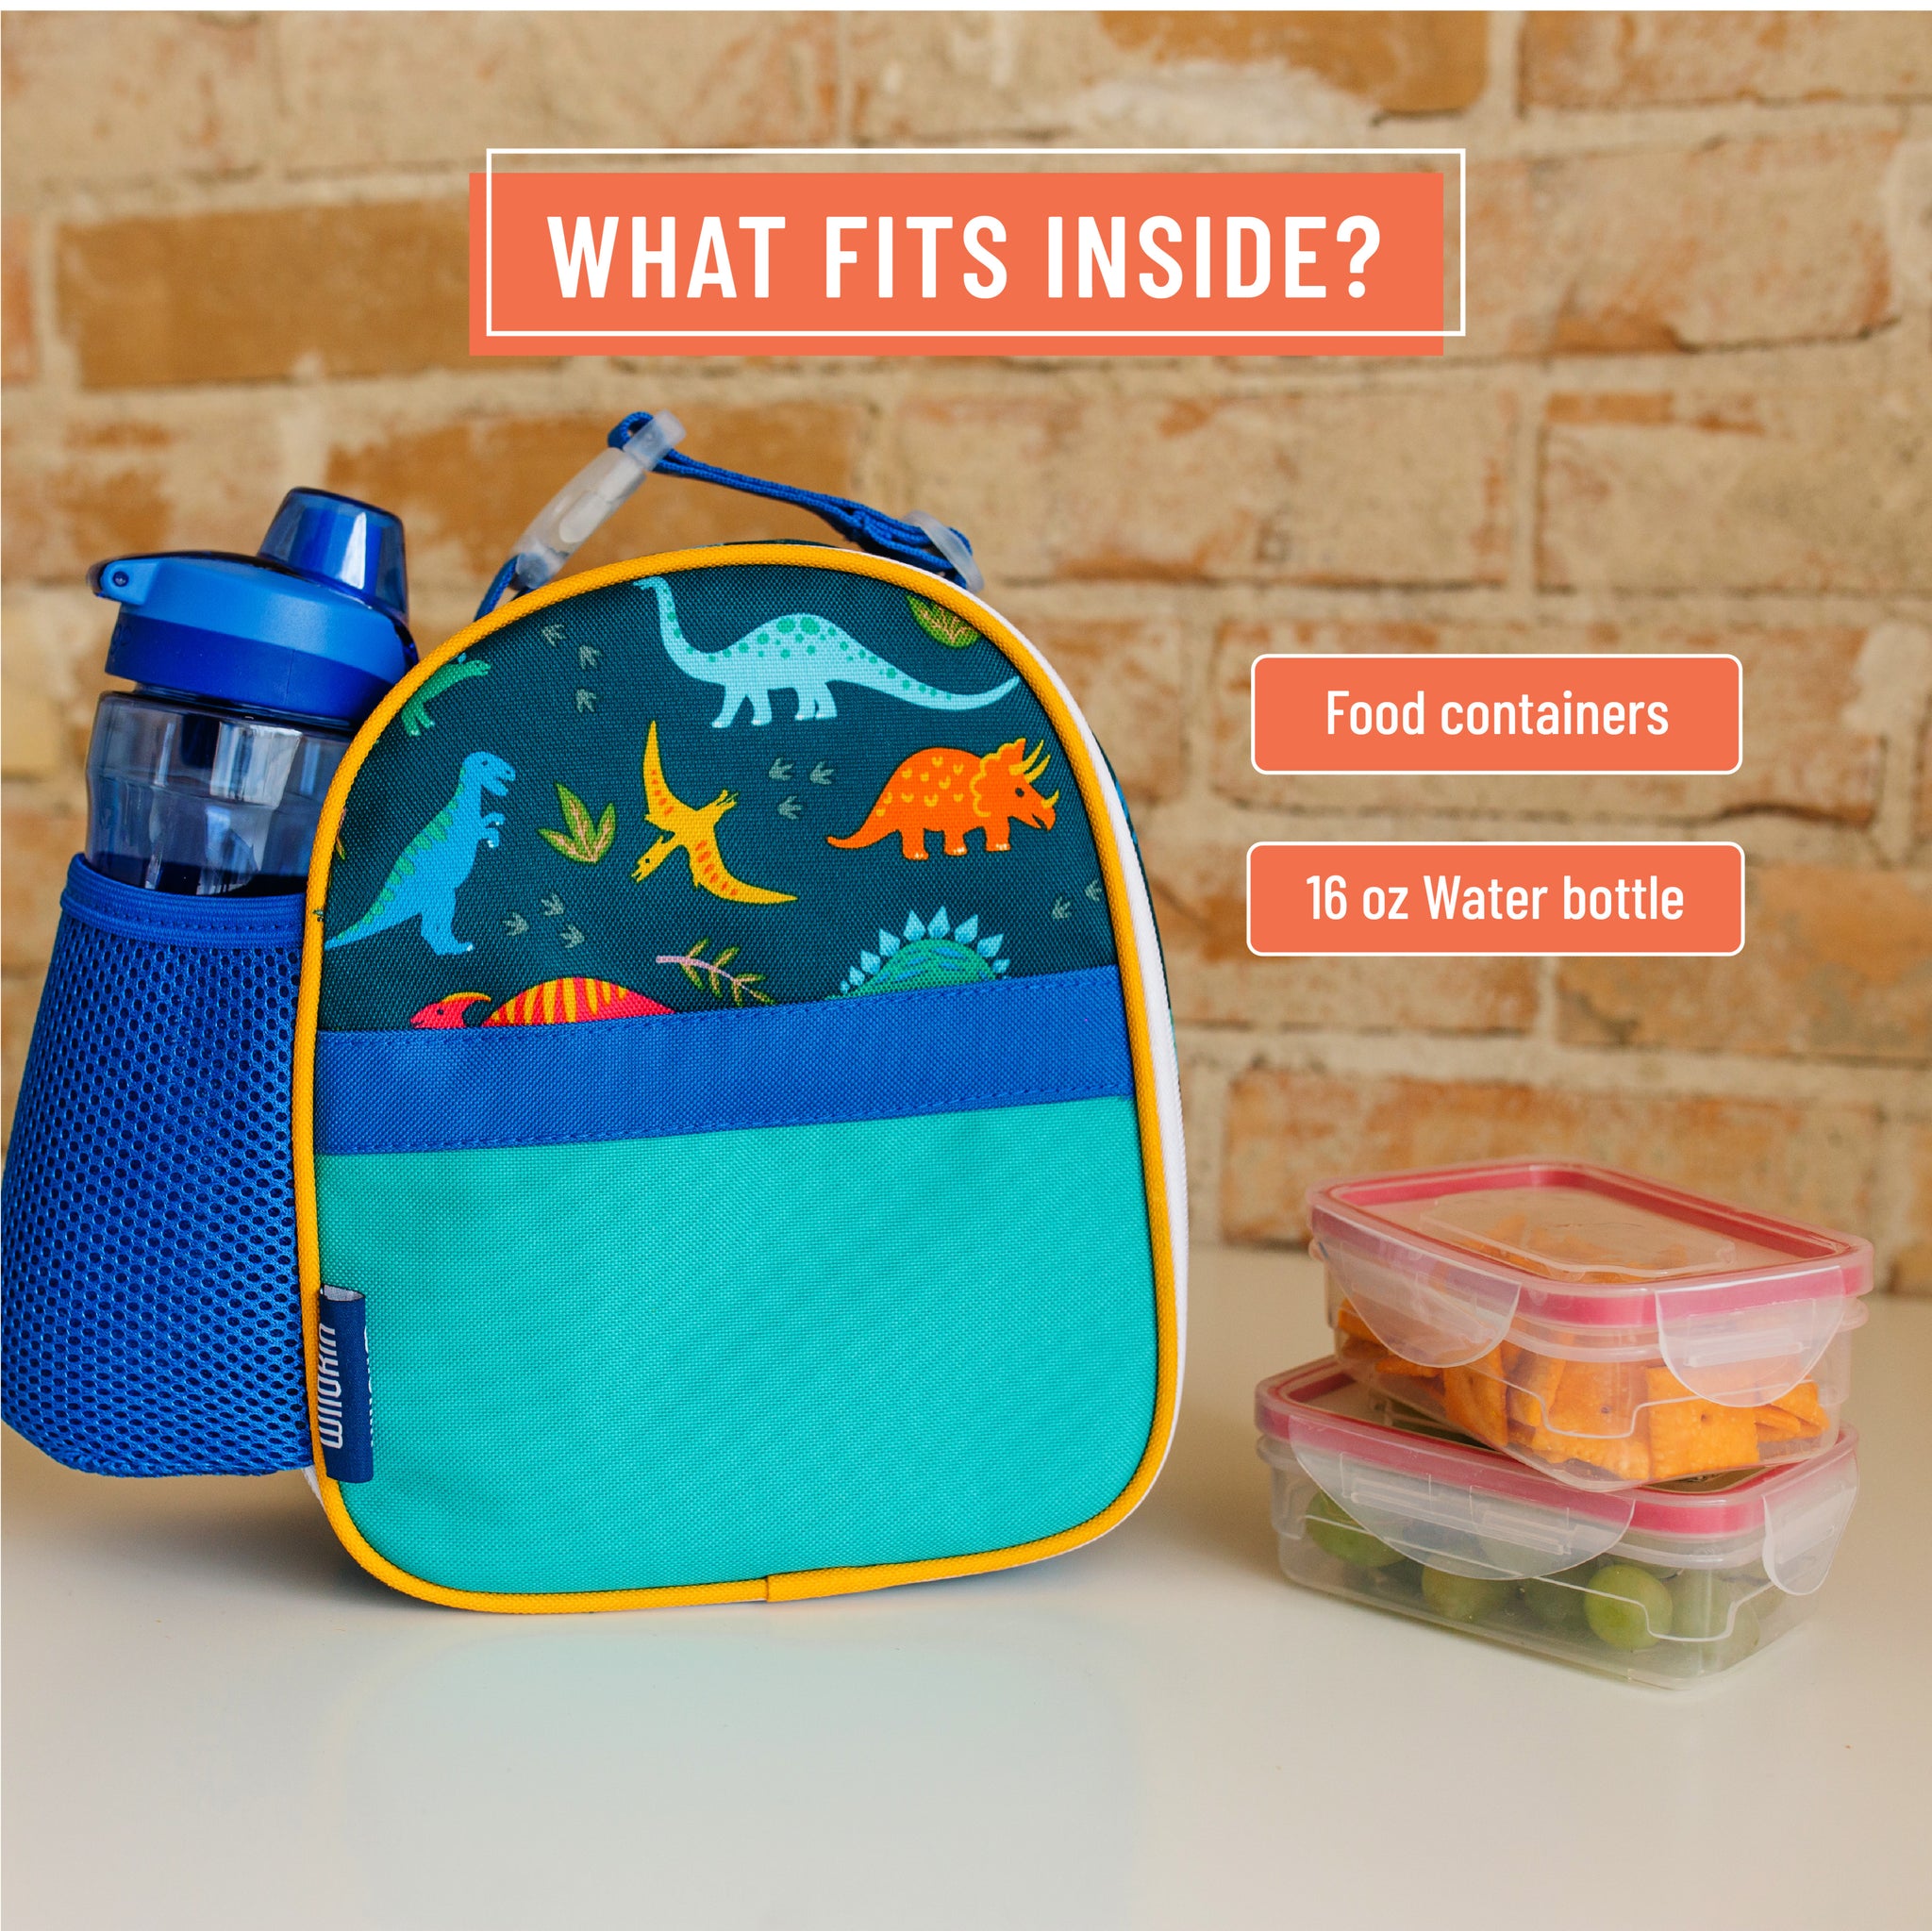 Wildkin Jurassic Dinosaurs Two Compartment Lunch Bag